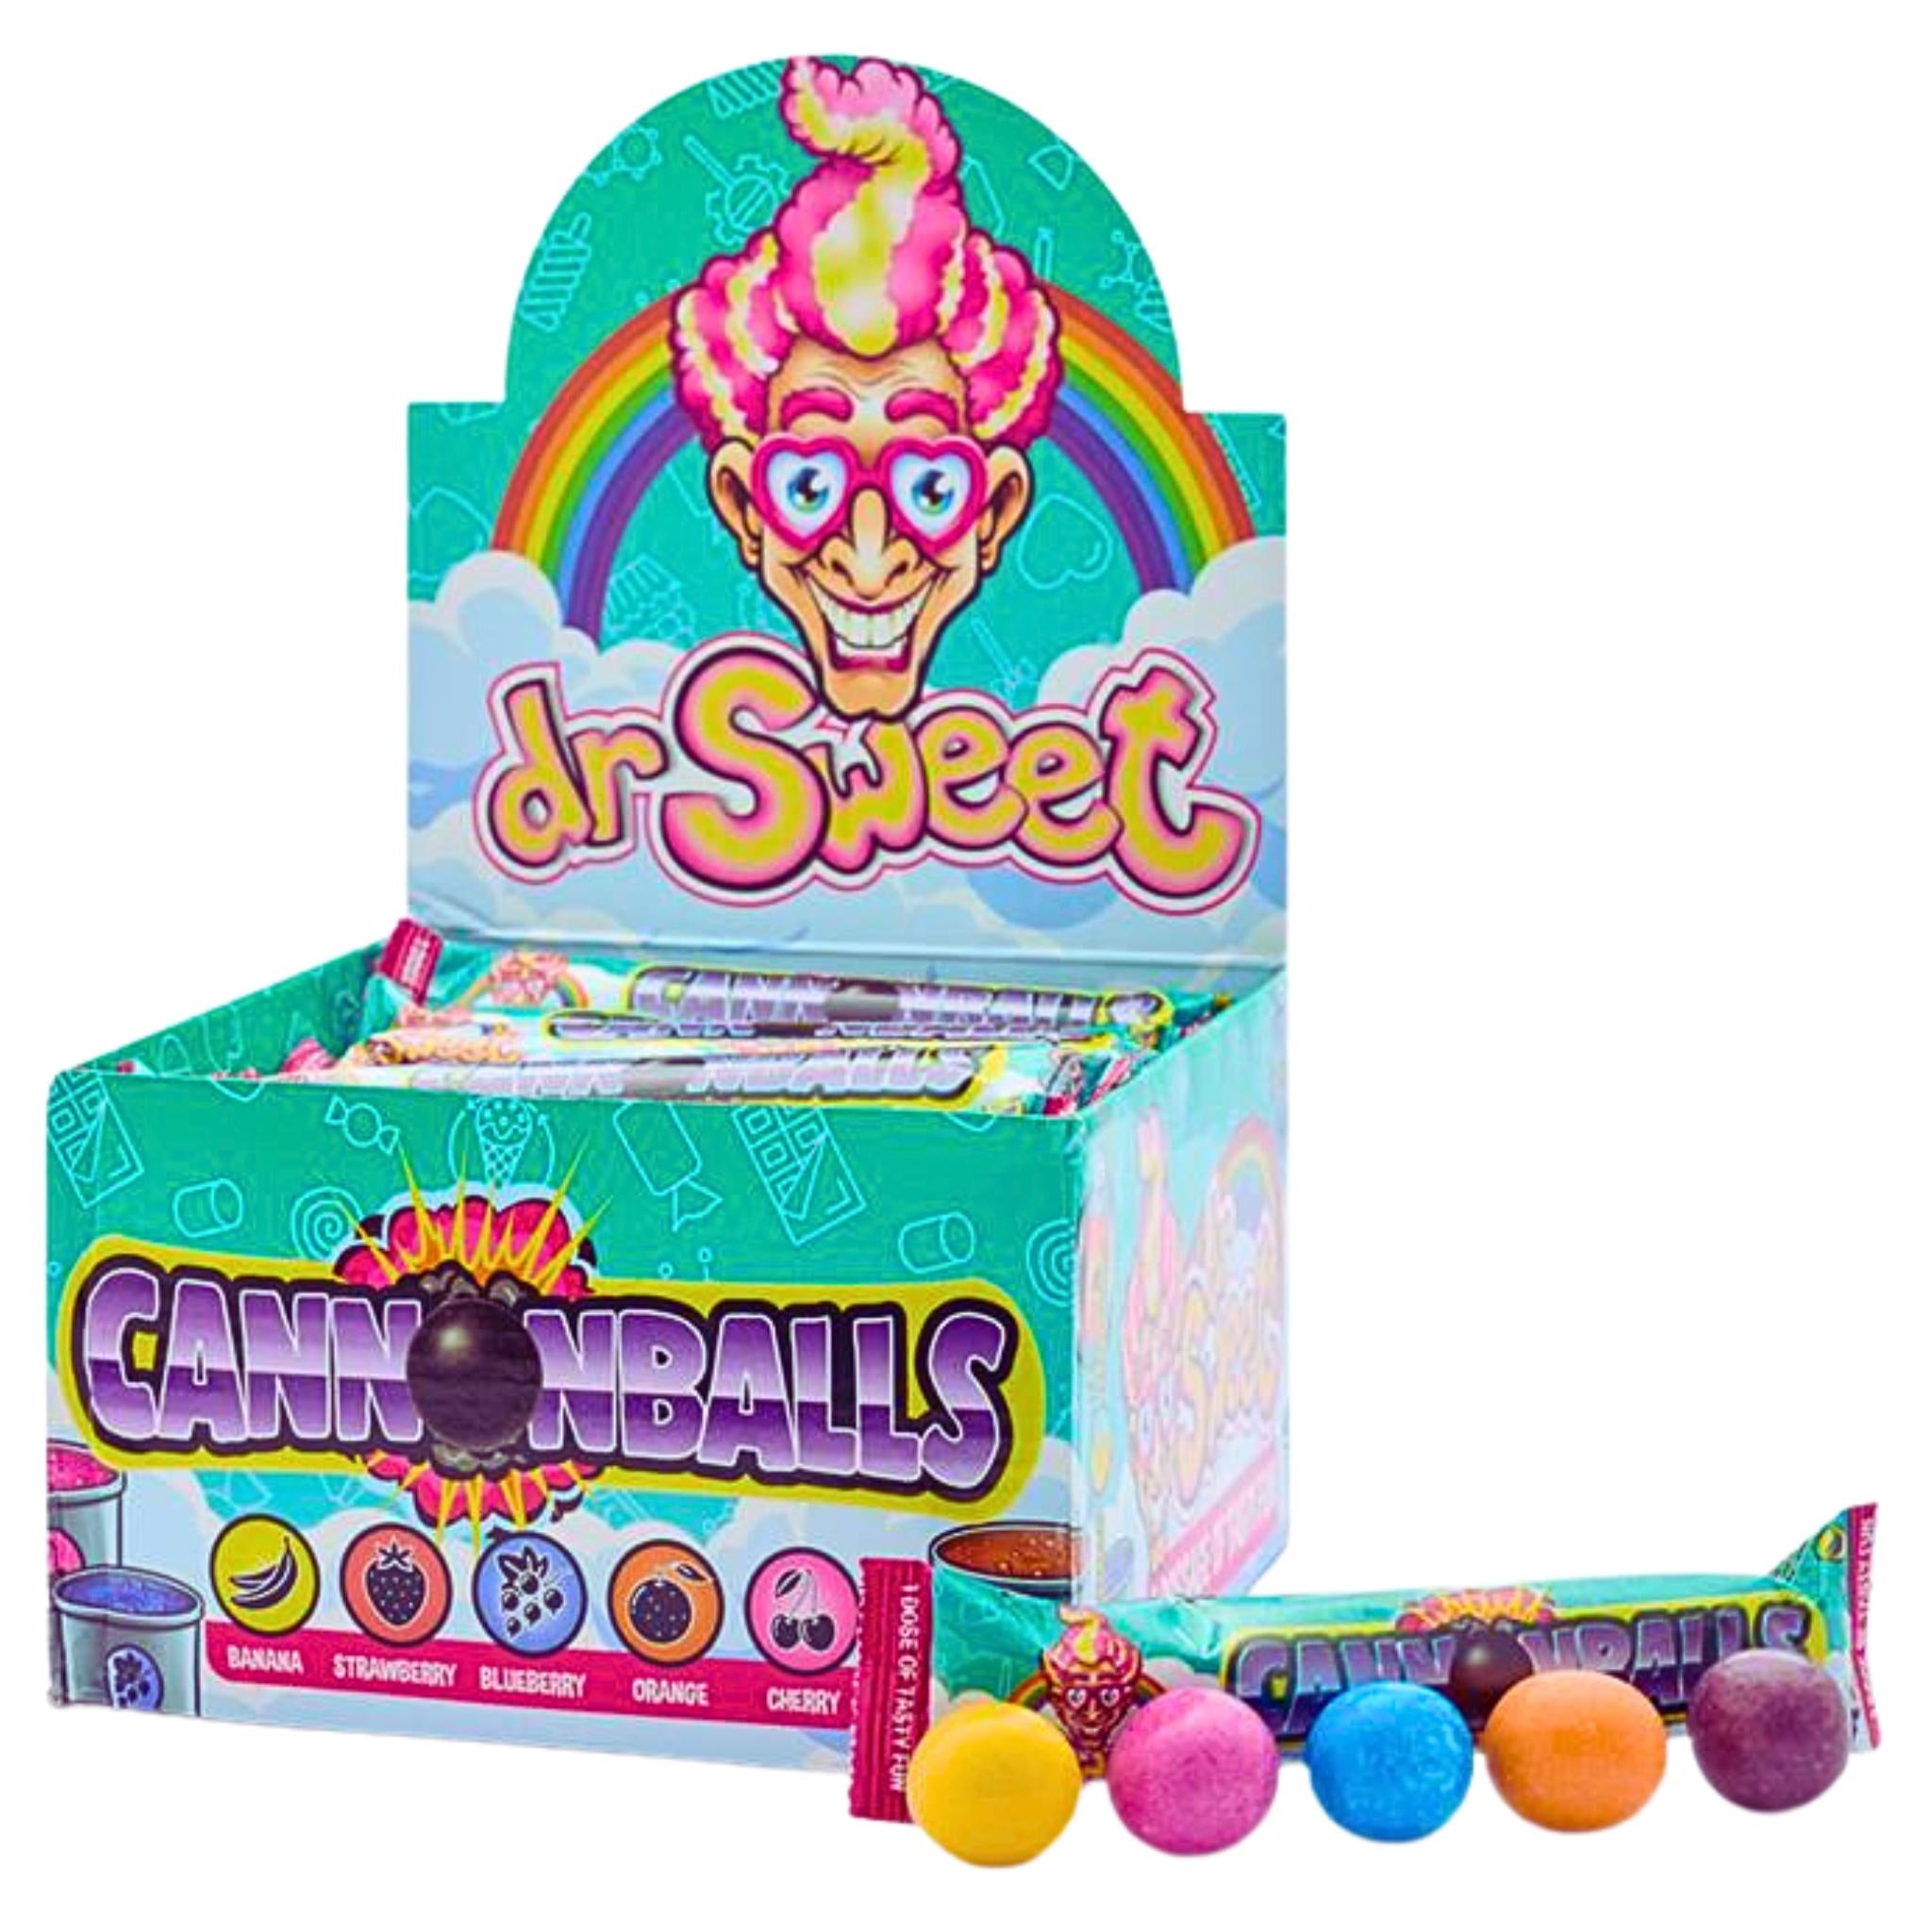 Dr Sweet Cannon Balls - 40g (THT: 10-12-2023)